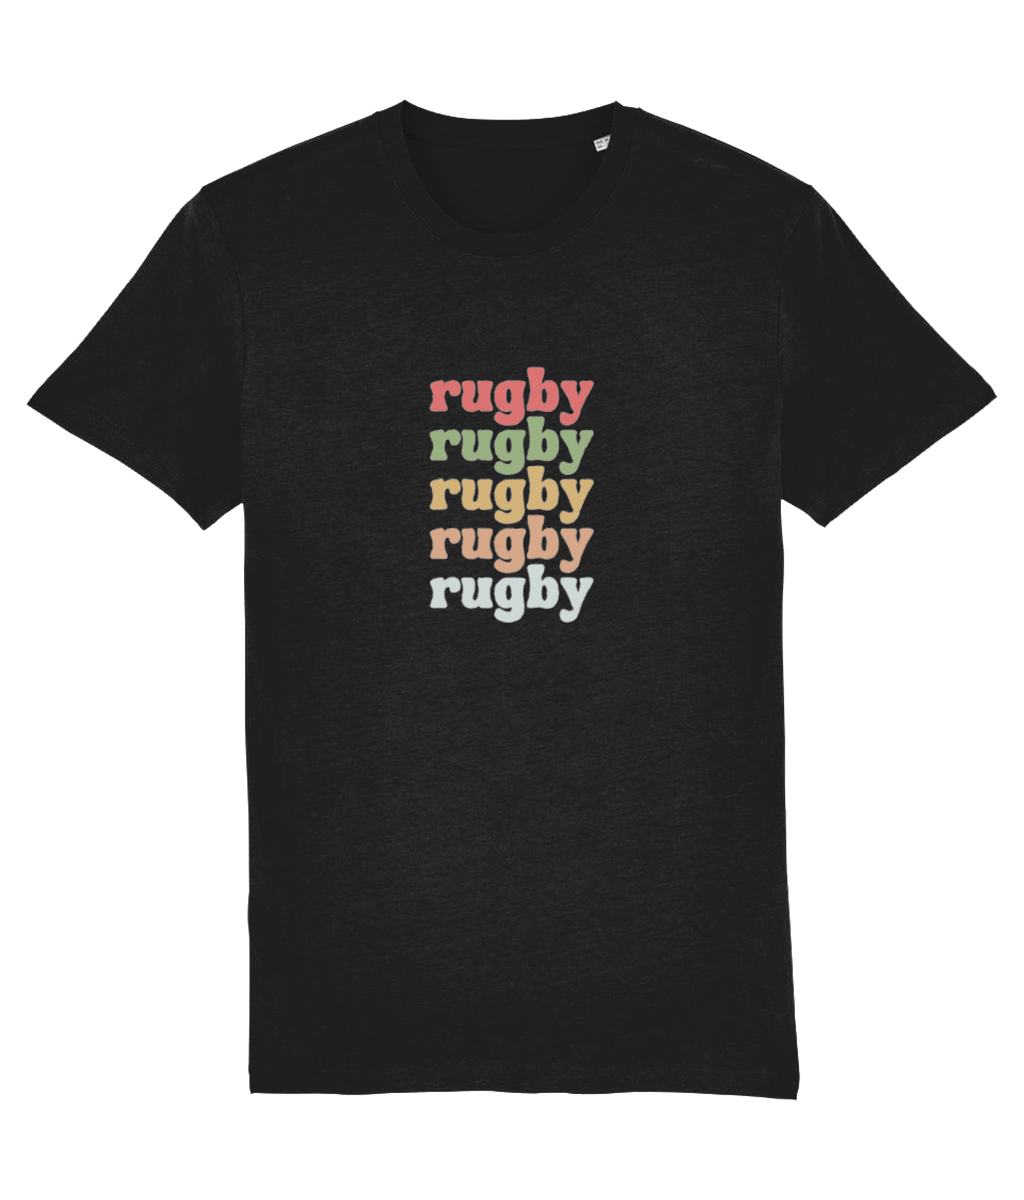 Retro Style Rugby T-Shirt